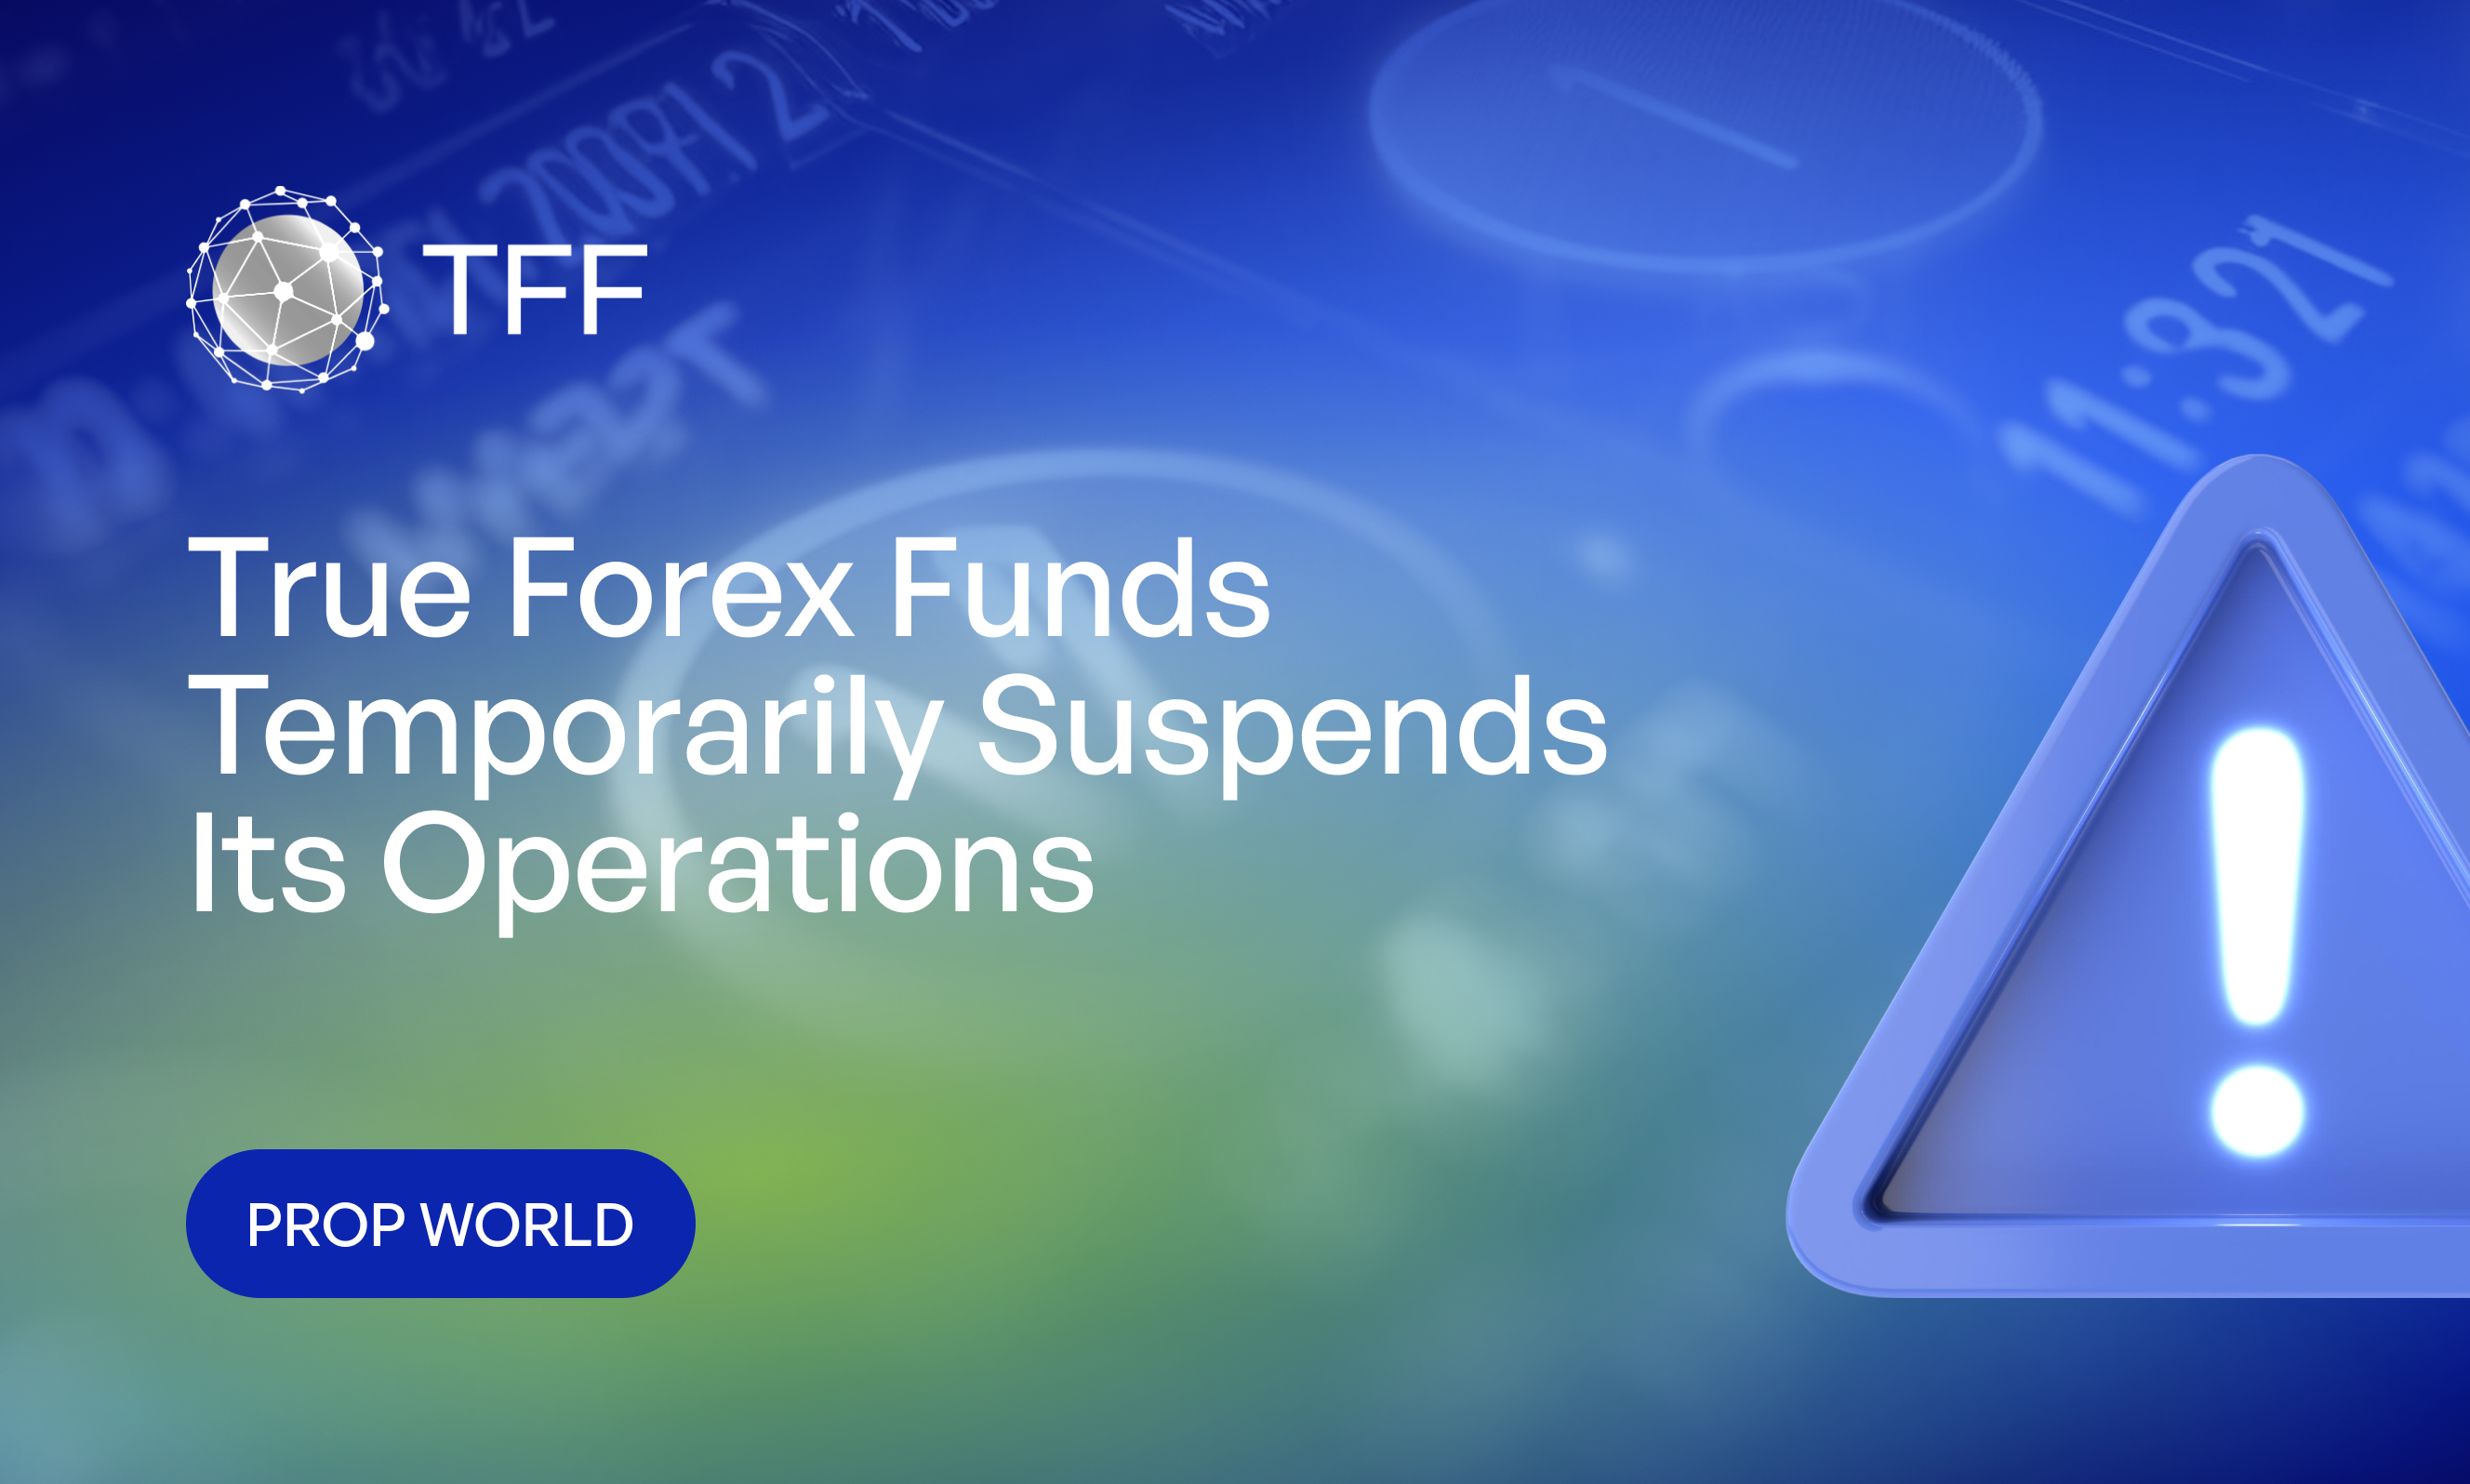 True Forex Funds Temporarily Suspends Its Operations